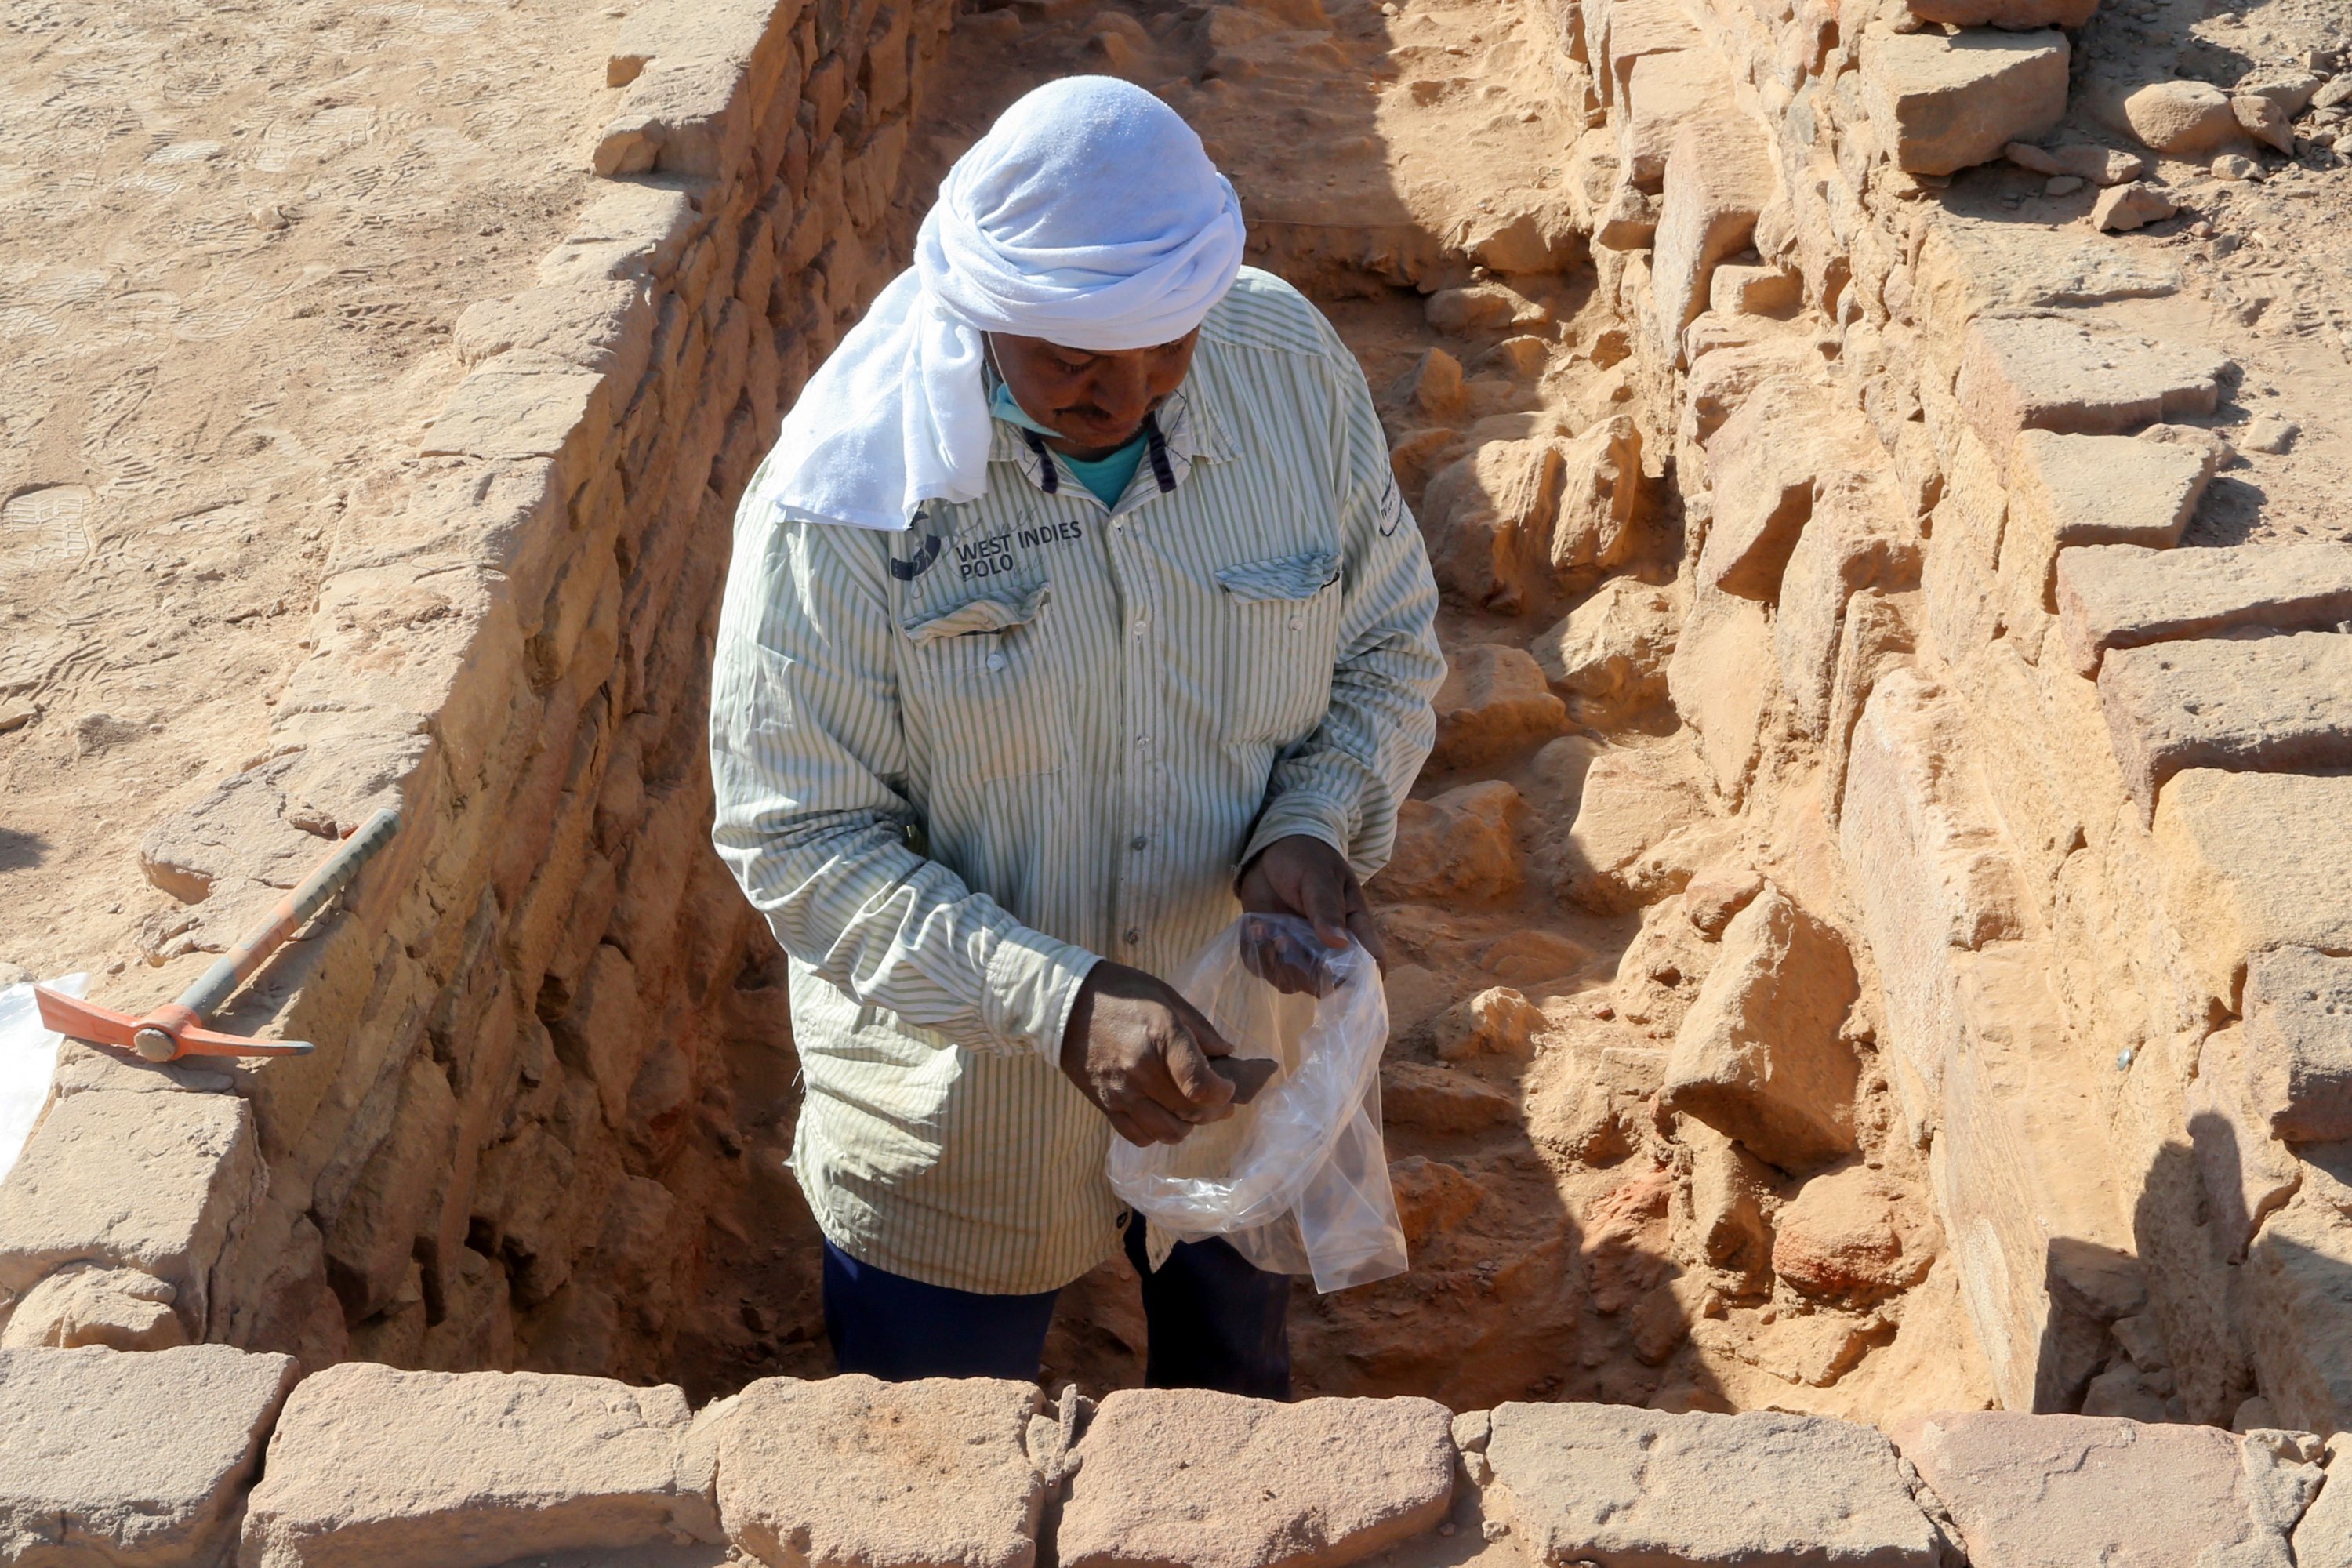 An archaeologist carefully cleans the pottery to examine the findings known to be from the Dadan and Lihyan civilization dated 1,000 B.C., Al-Ula, Saudi Arabia, Oct. 30, 2021. (Reuters Photo)